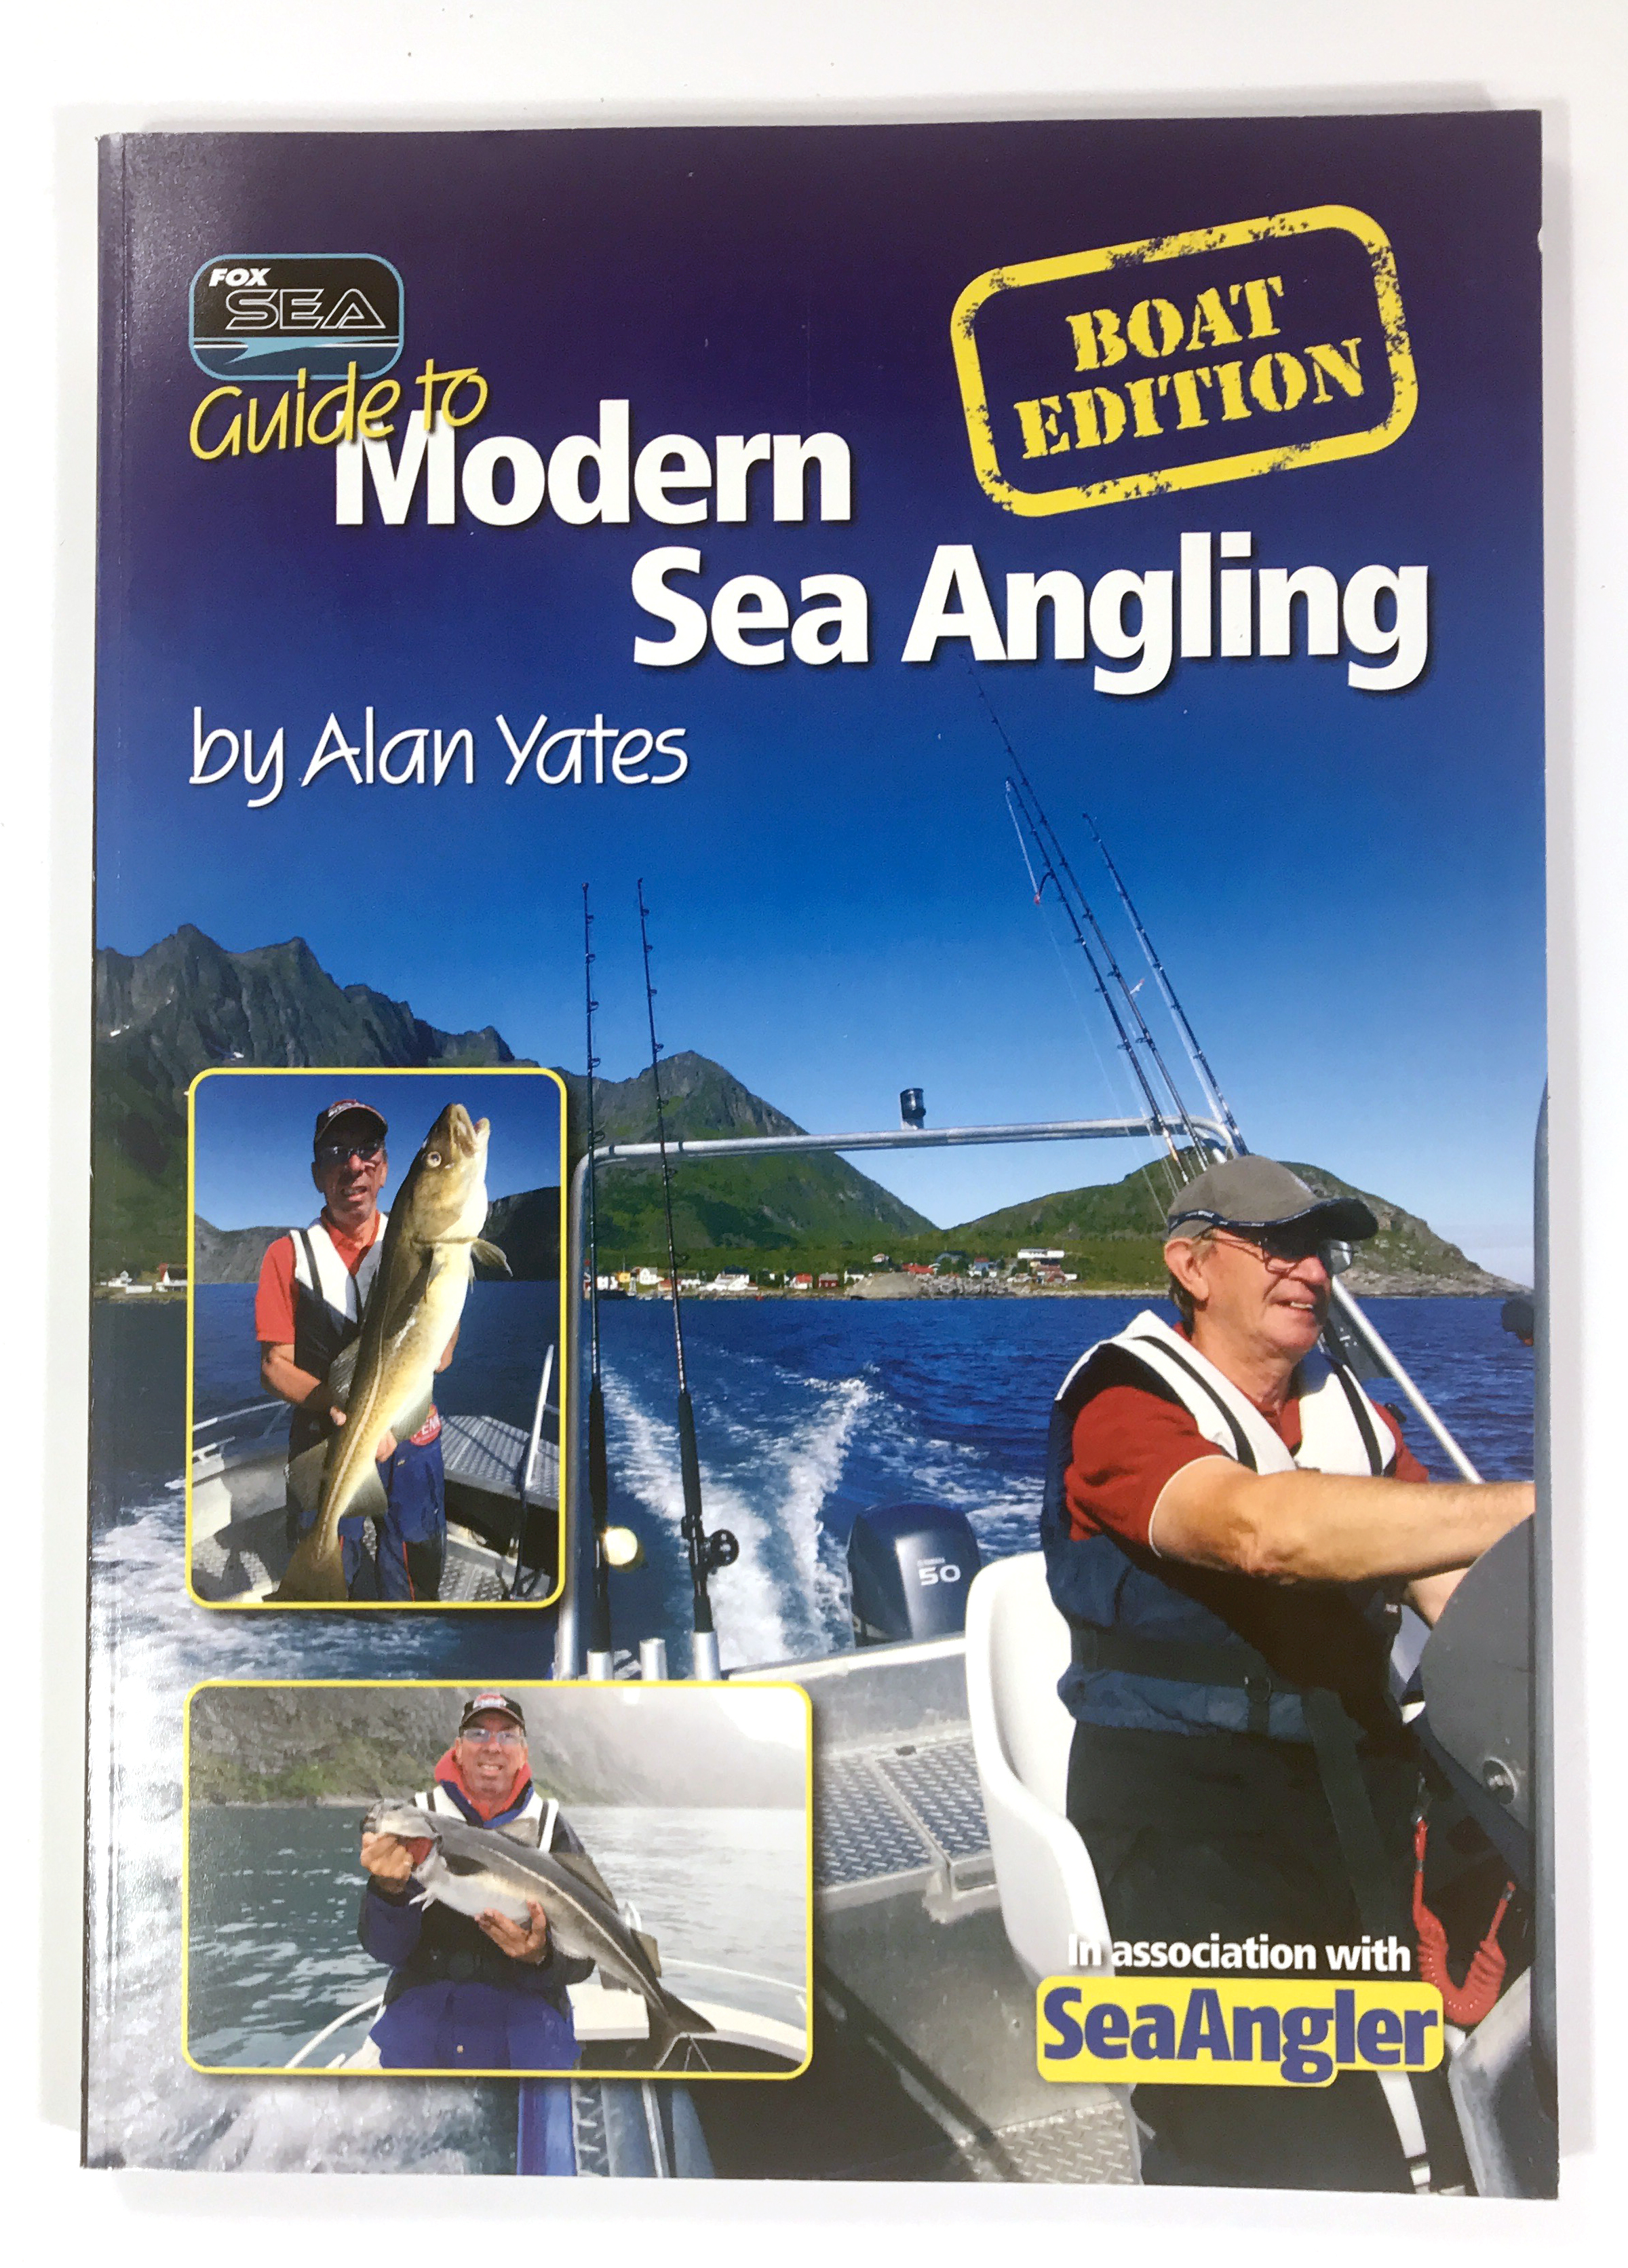 Fox Guide To Modern Sea Angling Boat Edition Book – Glasgow